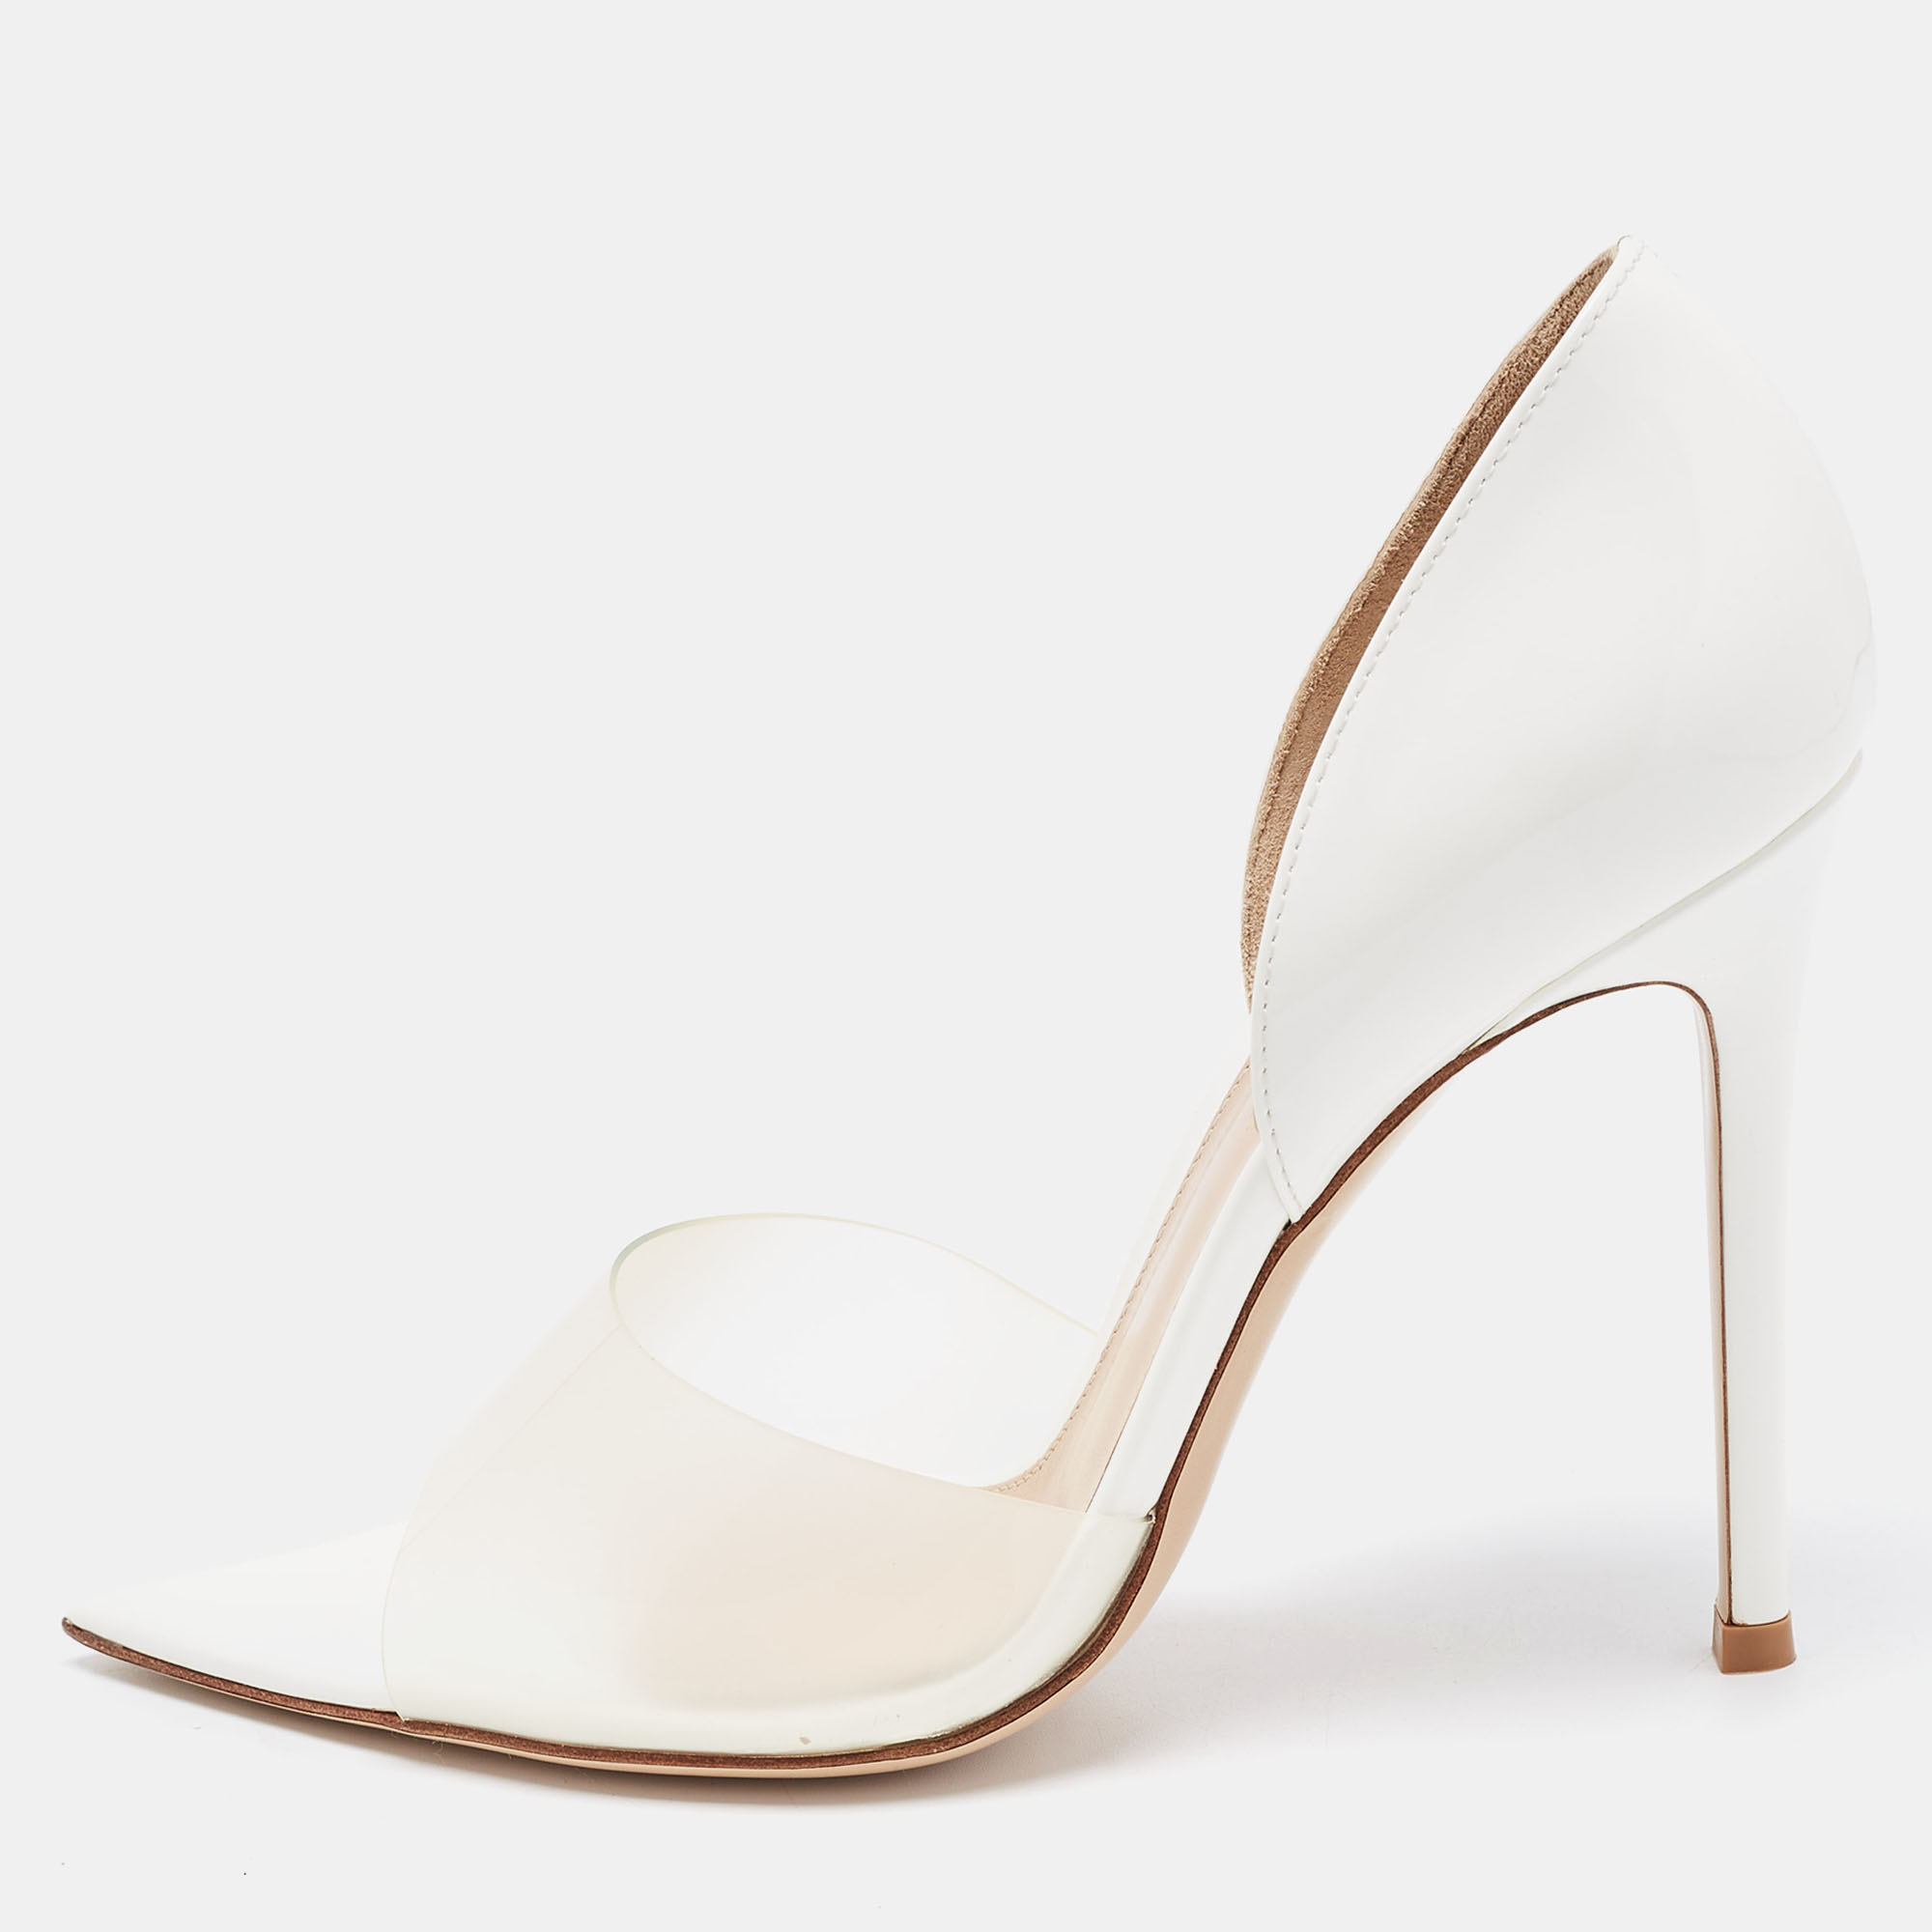 Gianvito rossi white pvc and leather bree d'orsay pumps size 38